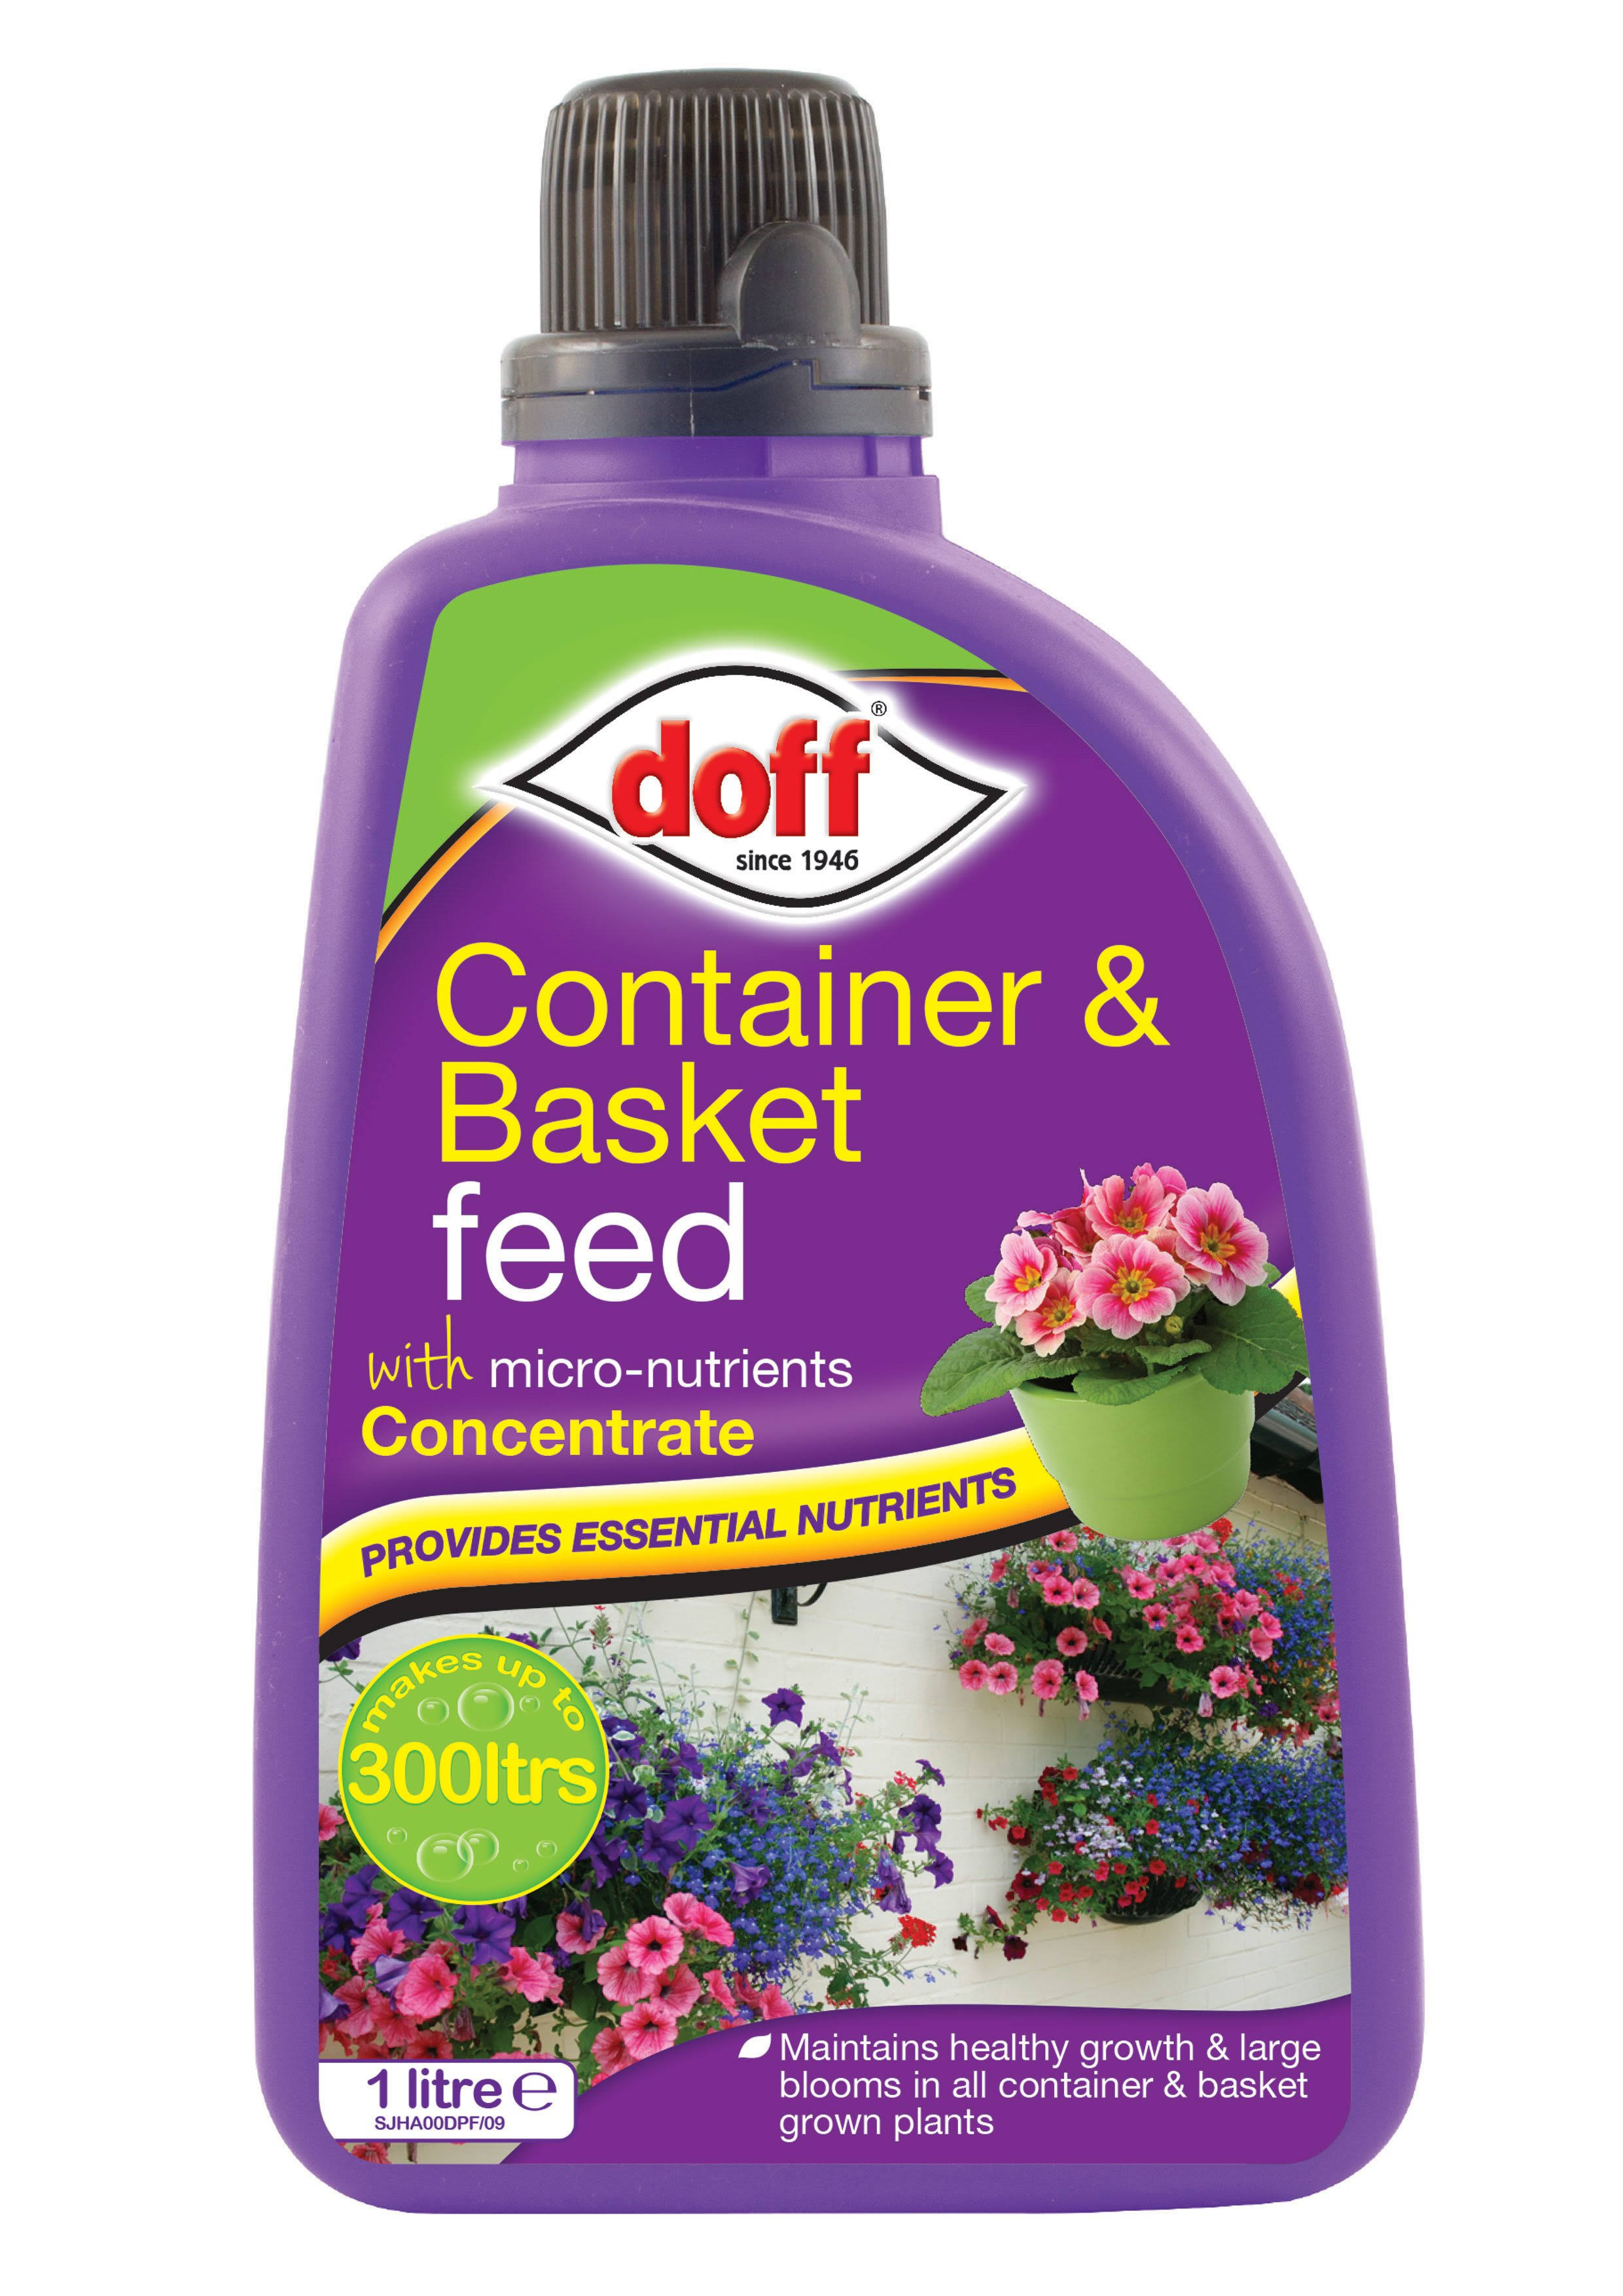 Doff Container & Basket Feed Concentrate